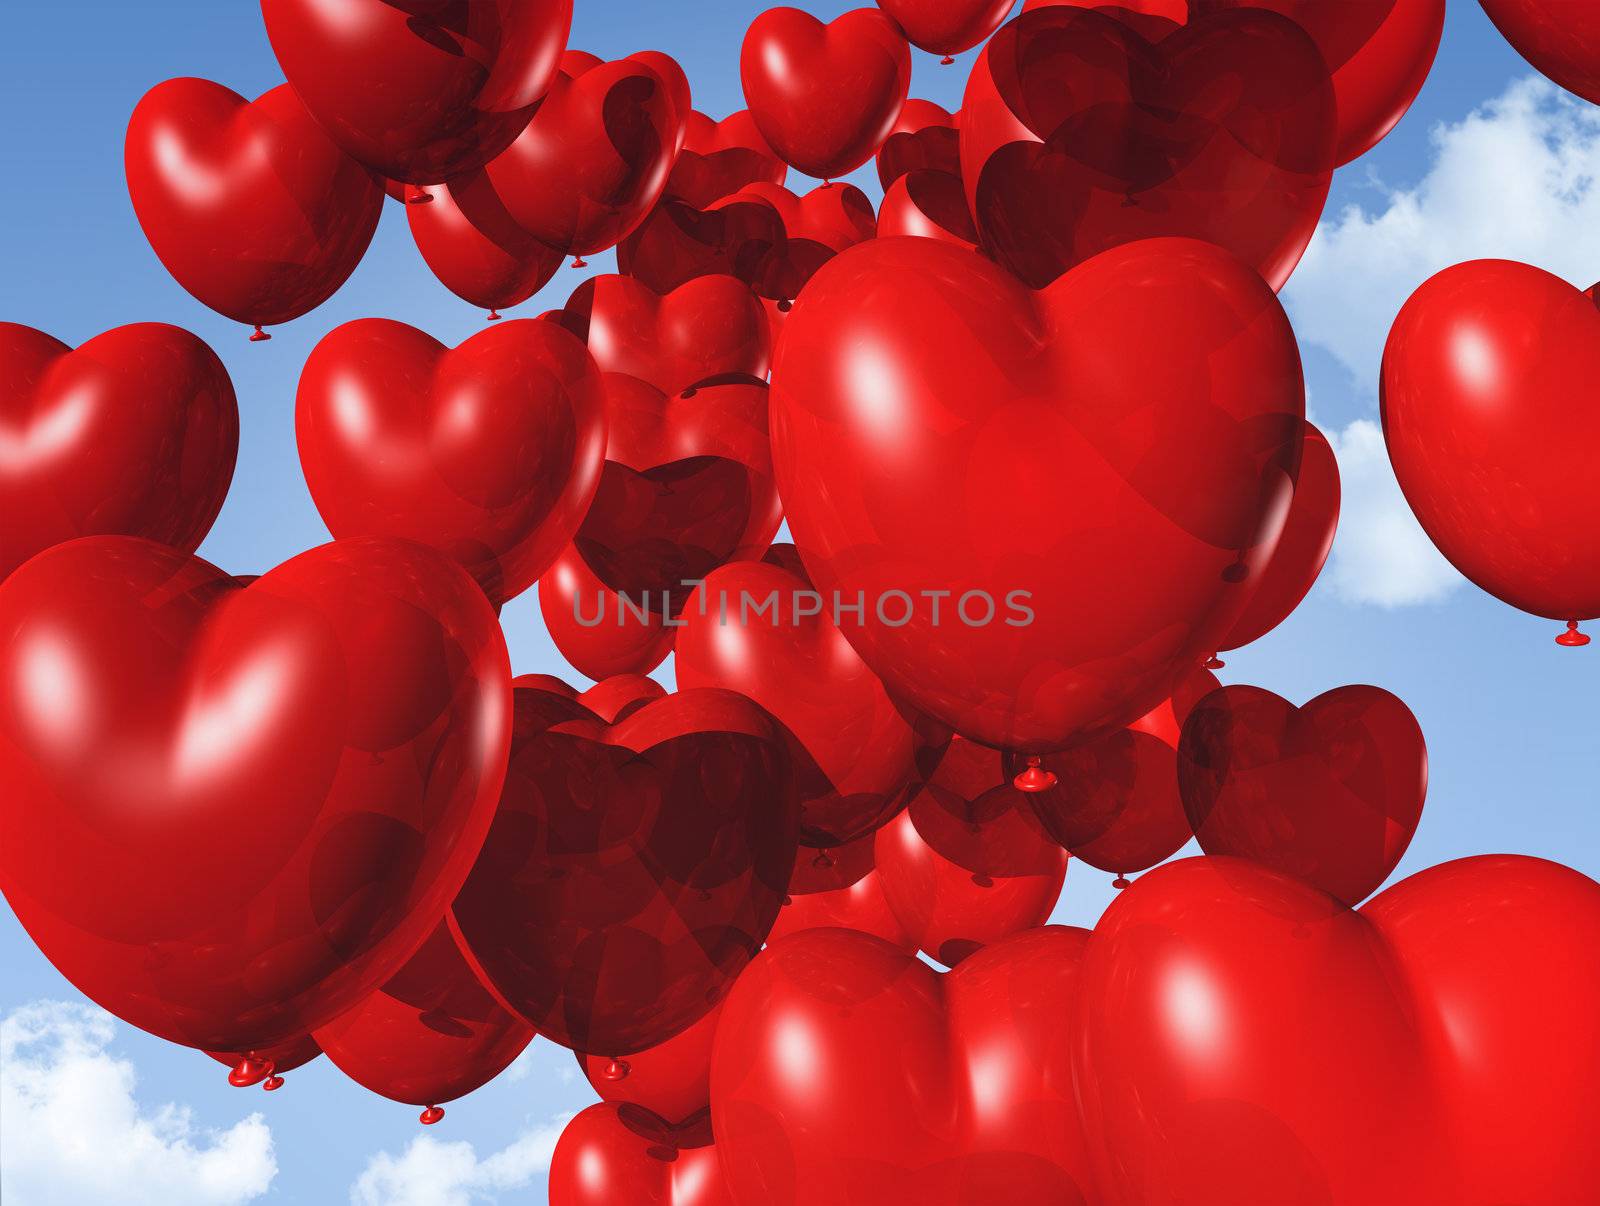 red heart shaped balloons floating in the sky by daboost